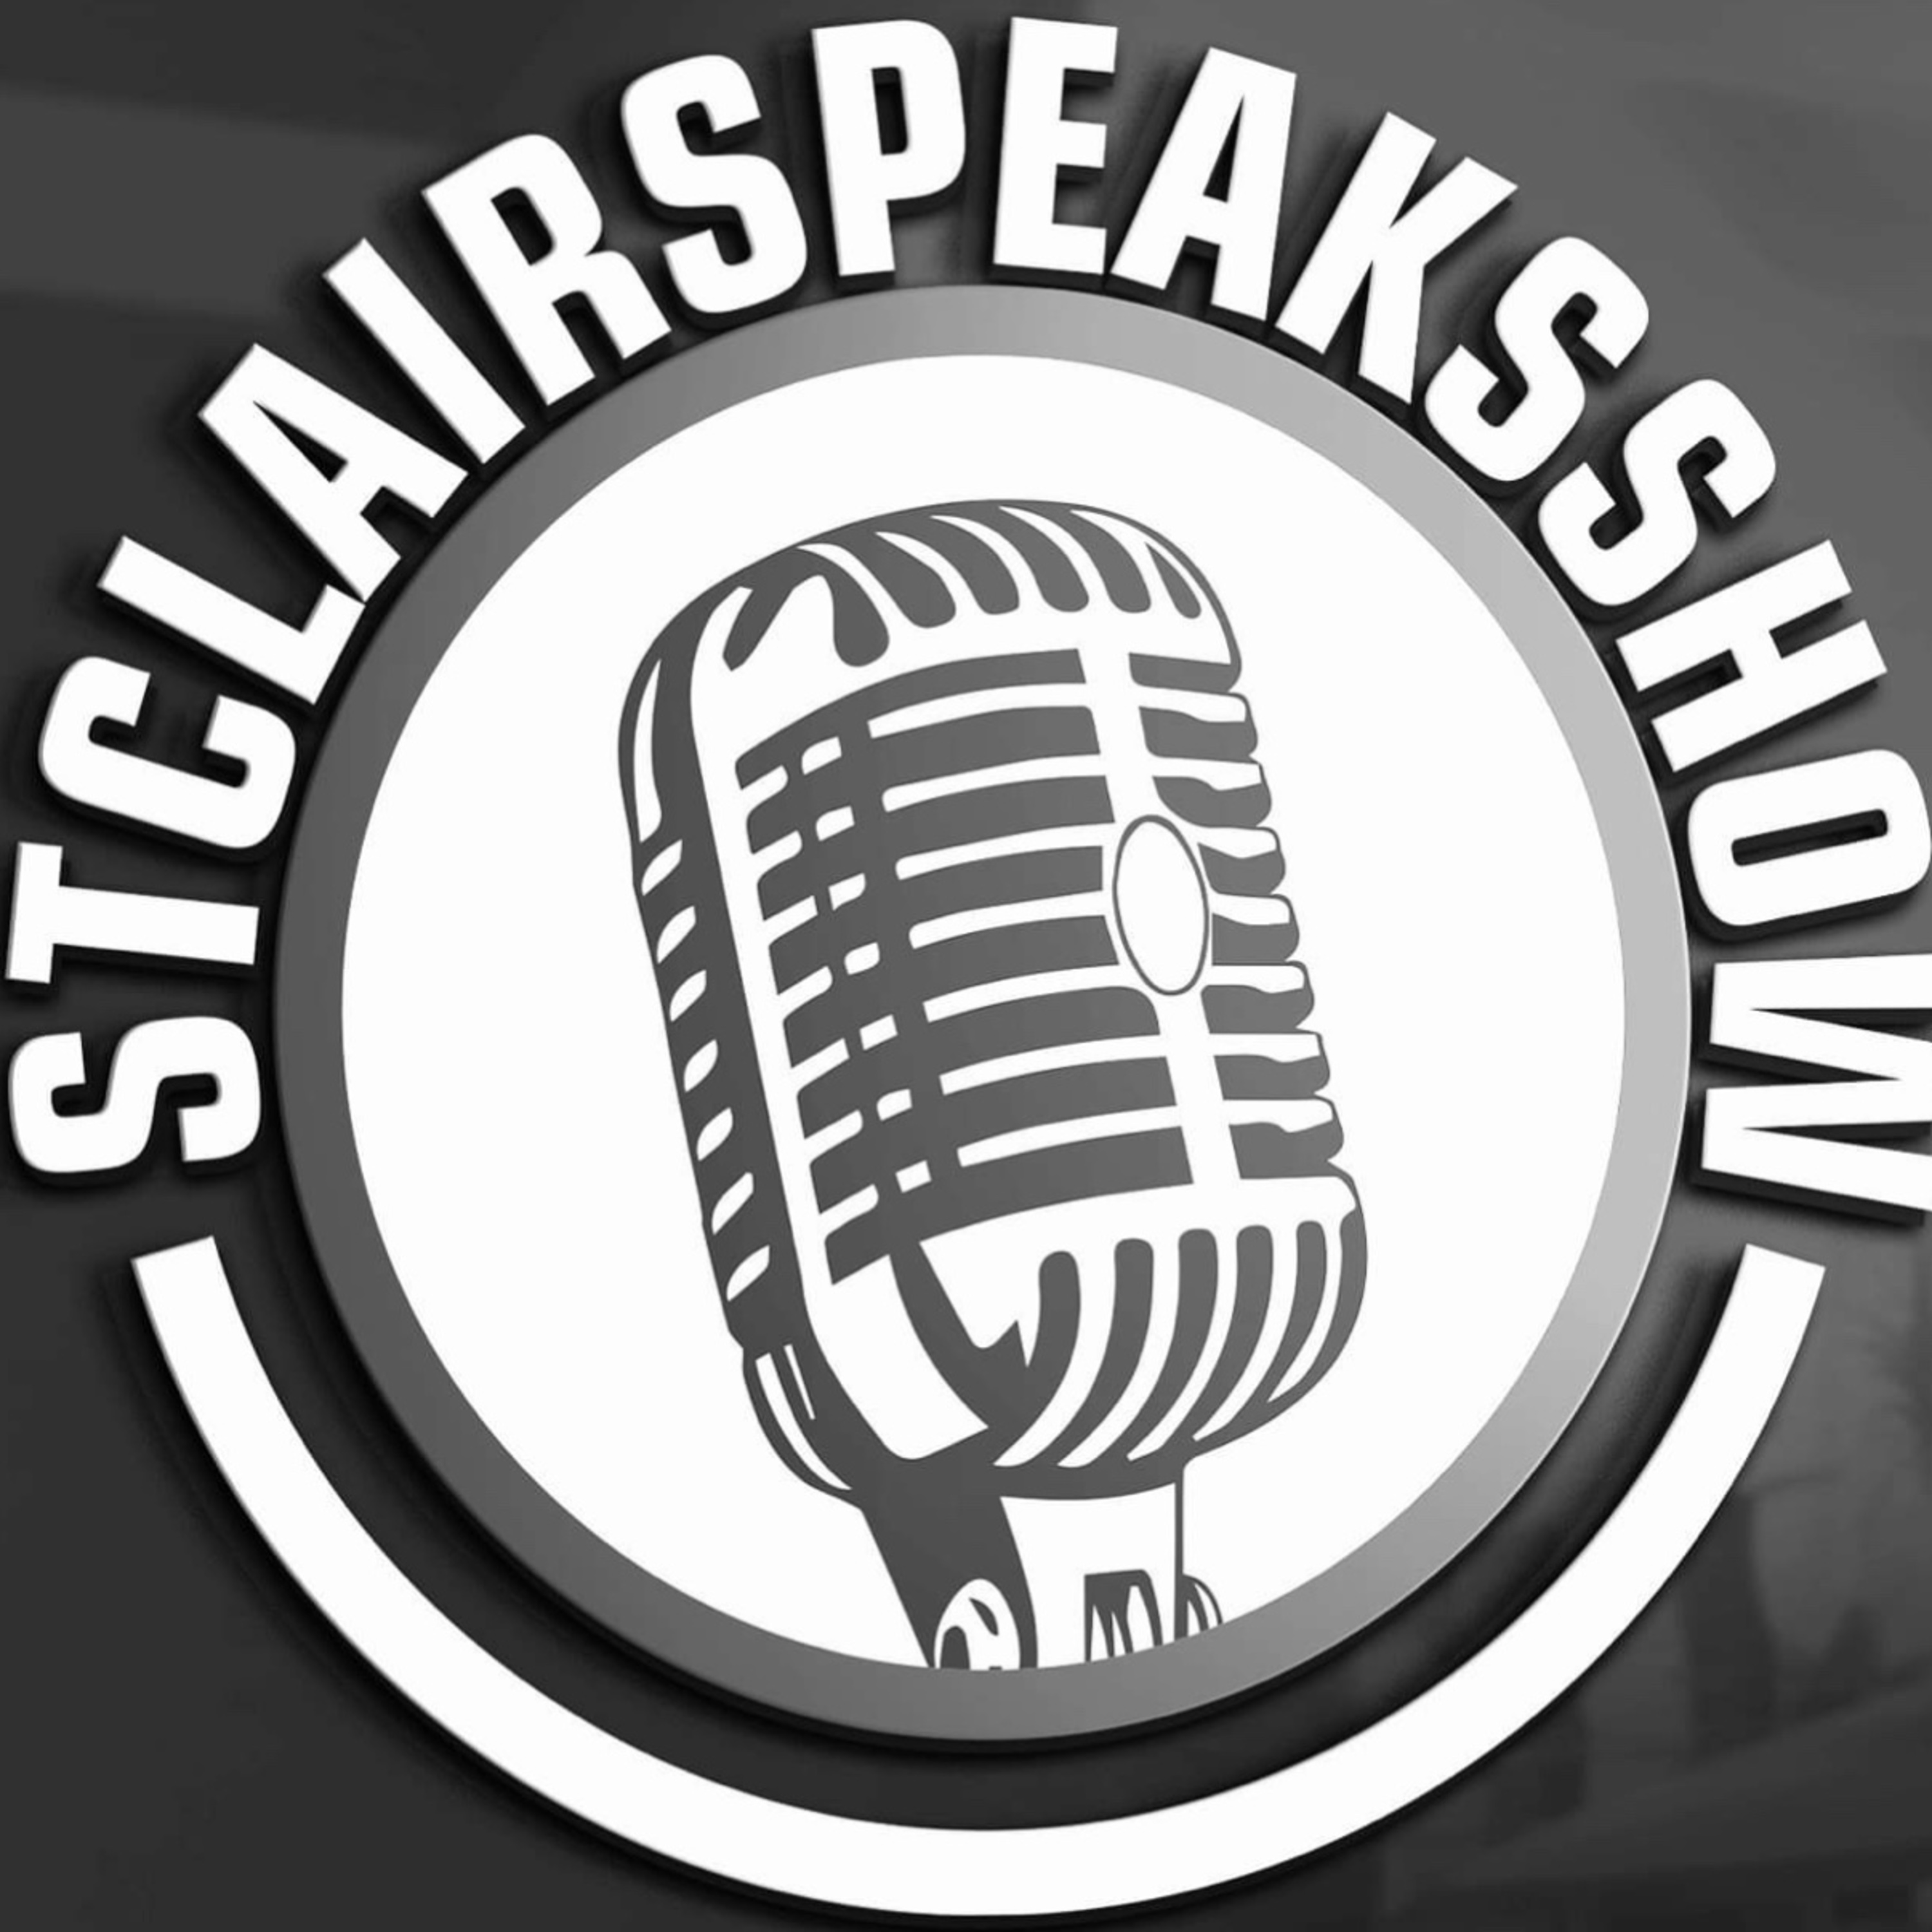 StclairSpeaksShow Ep. 09 Featuring Larry Apkes from Job Hackers Image